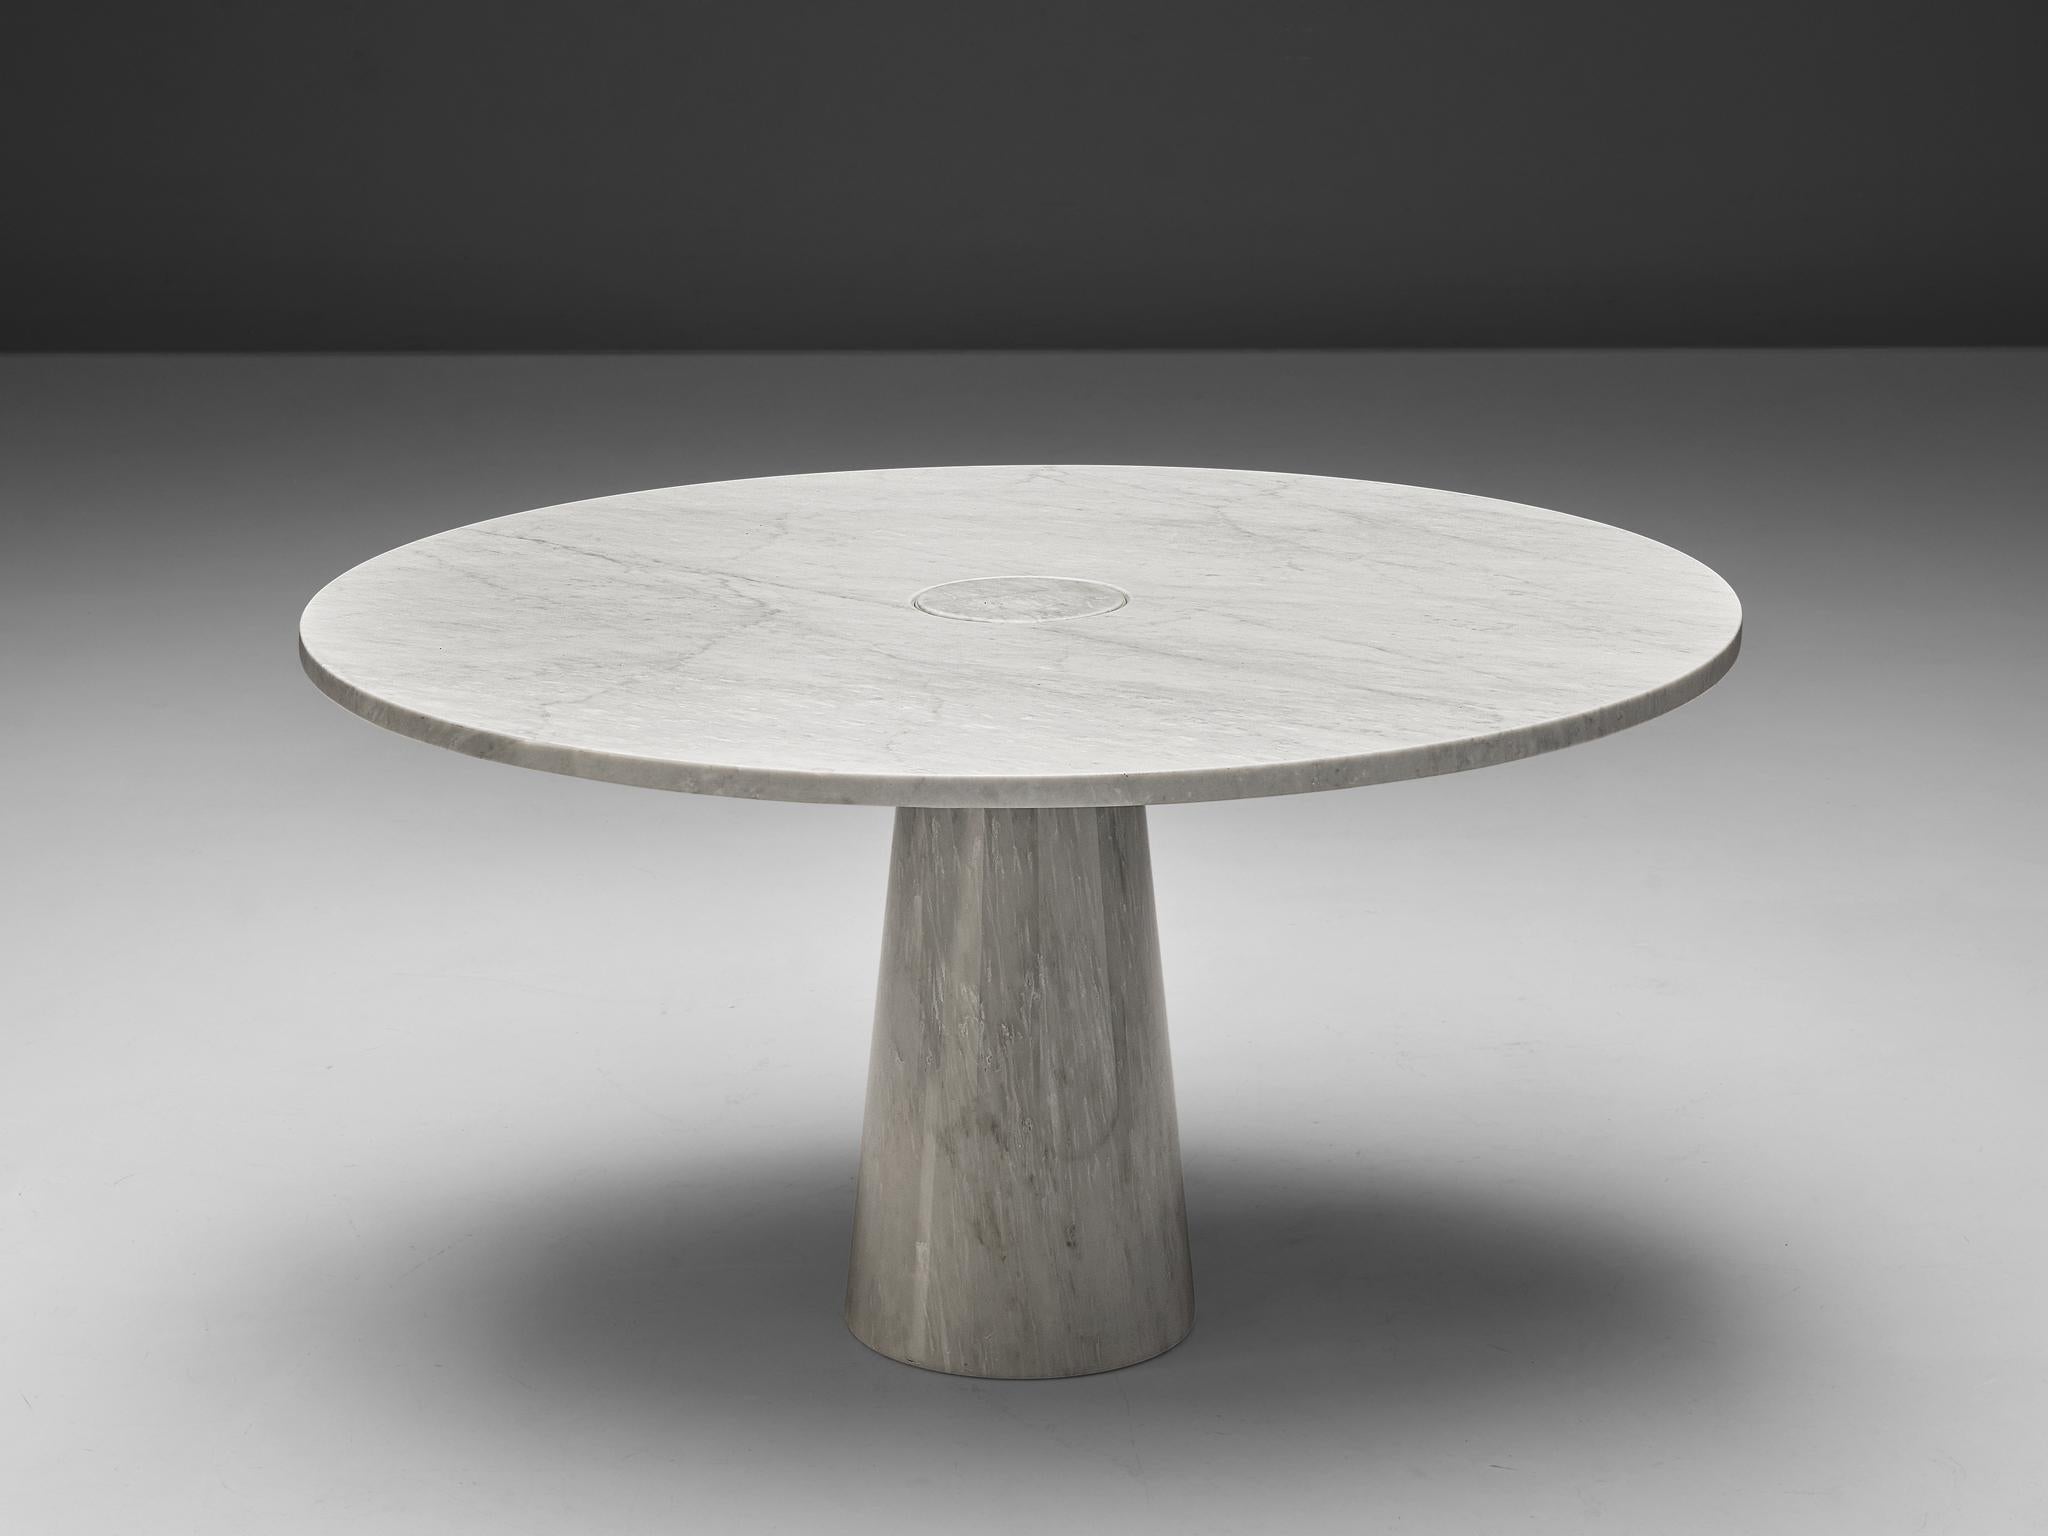 Angelo Mangiarotti, pedestal dining table, marble, Italy, 1970s

This architectural table is a skillful example of Postmodern design by Angelo Mangiarotti. The circular table features no joints or clamps and is architectural in its structure